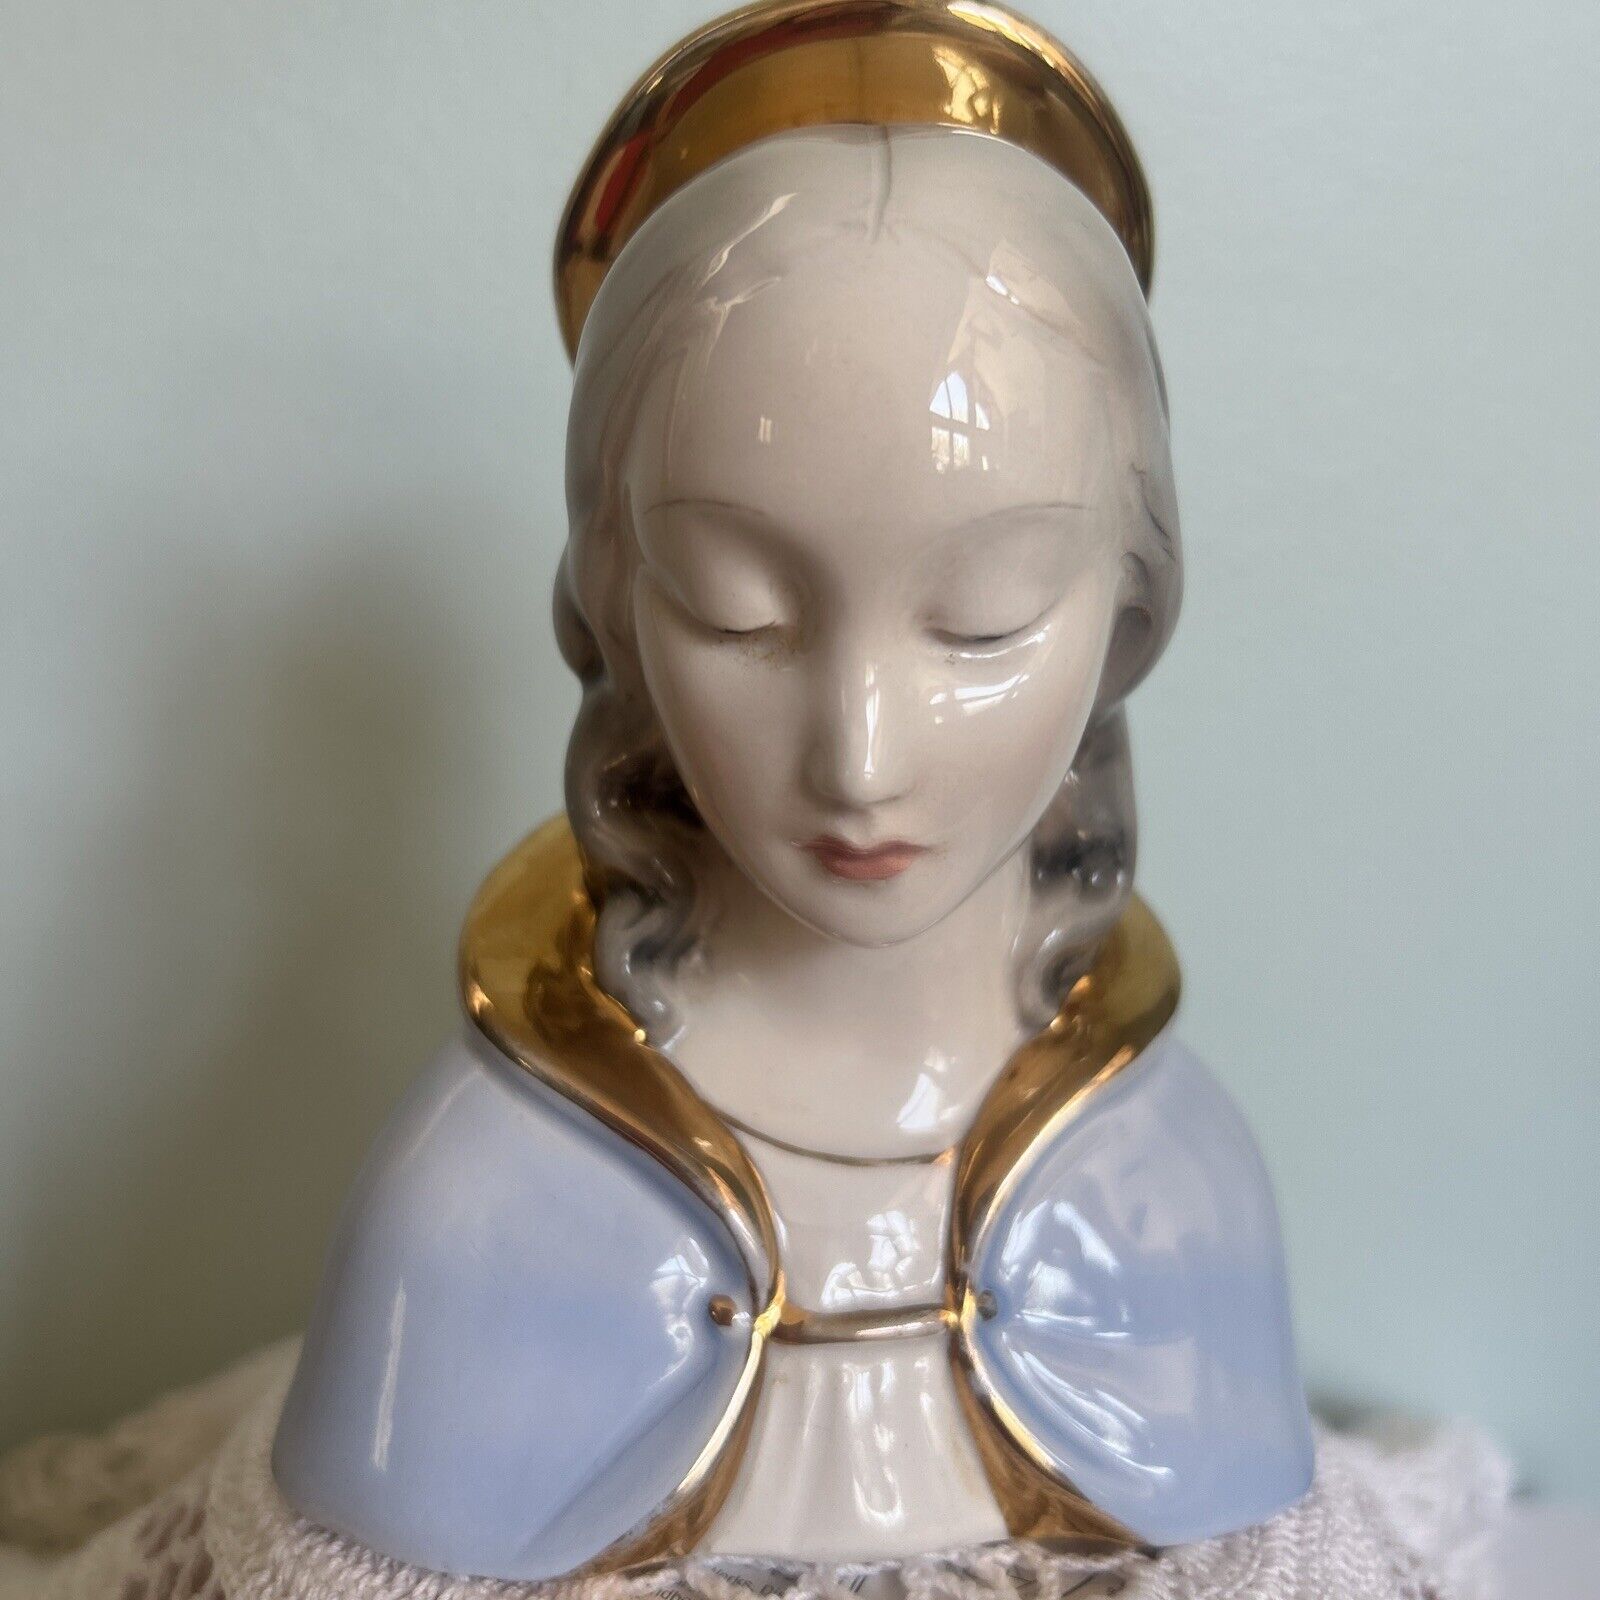 MADE IN ITALY CERAMIC MADONNA VIRGIN MARY WITH HALO WHITE BLUE GOLD BUST